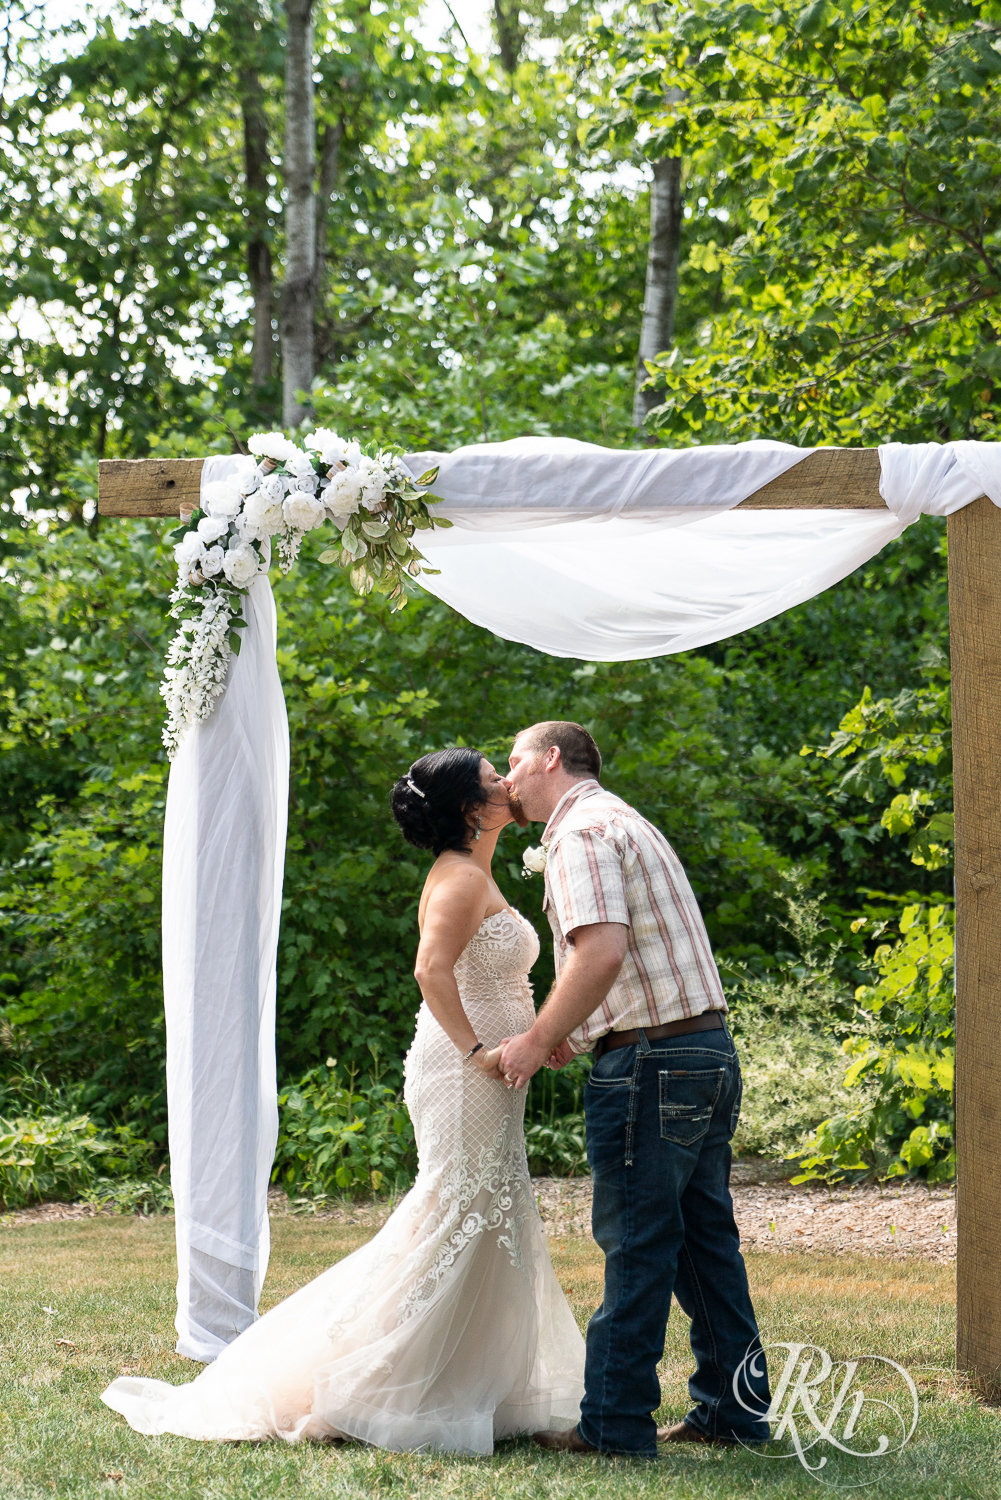 Bride and groom kiss at wedding ceremony at Croix View Farm in Osceola, Wisconsin.